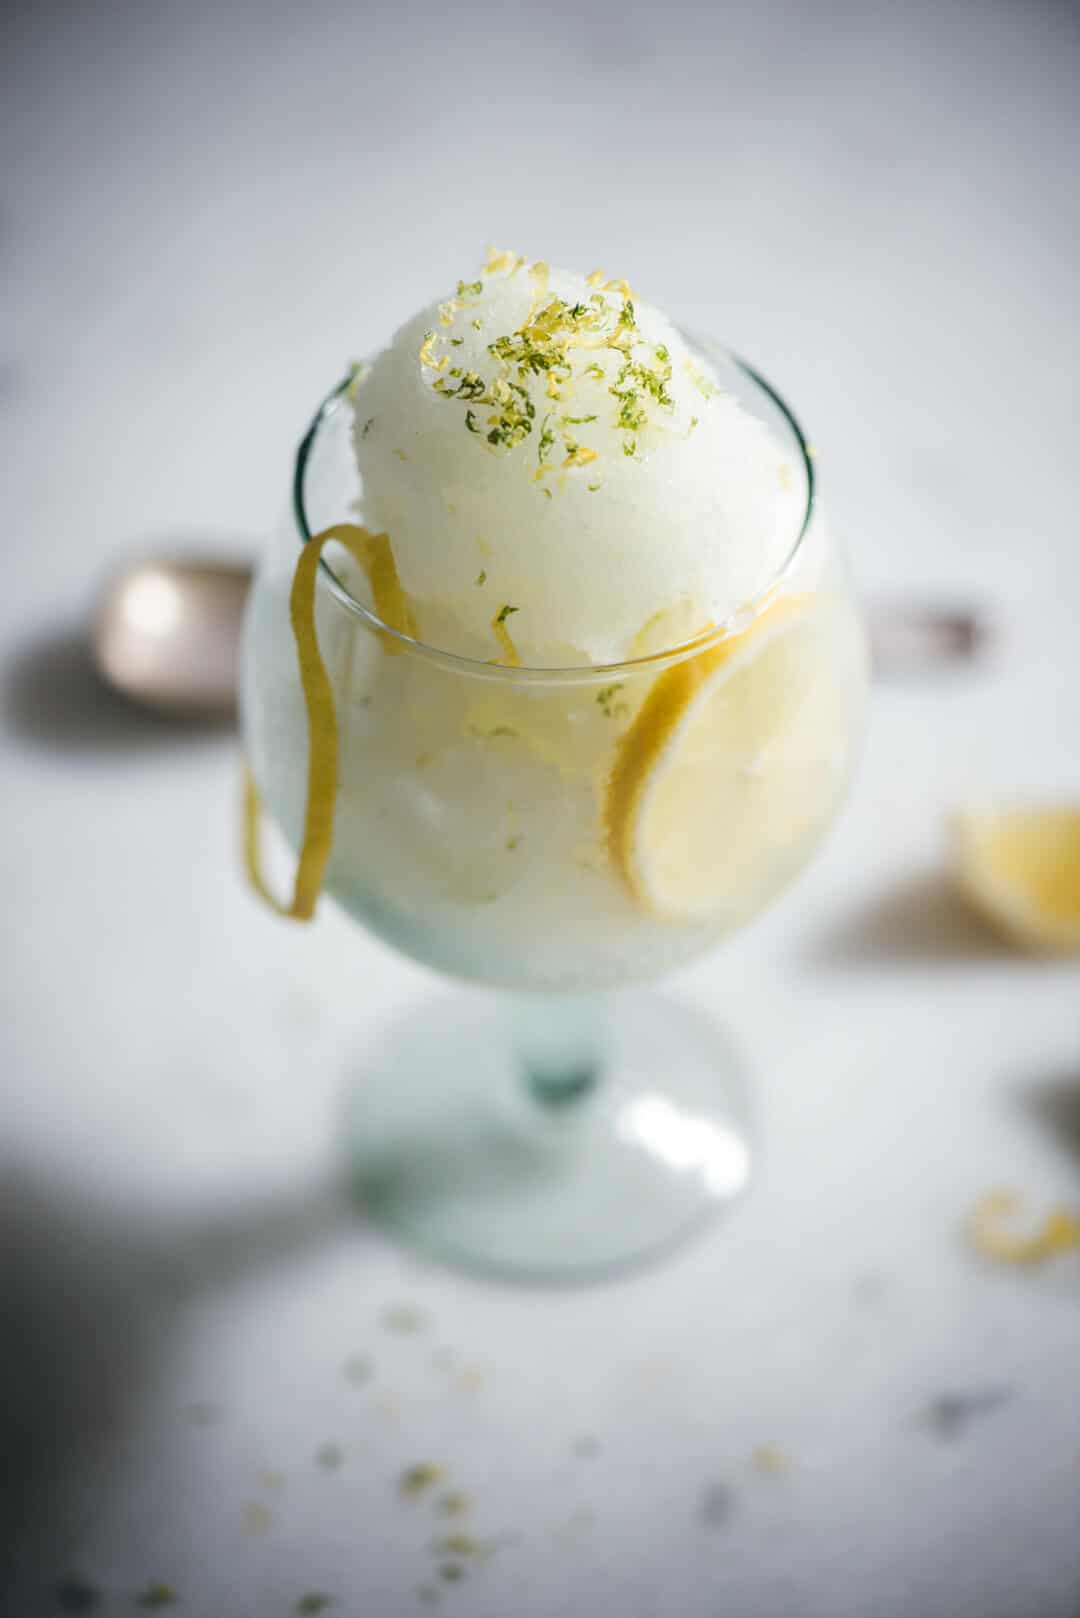 Gin and Tonic sorbet in a glass with lemon garnish